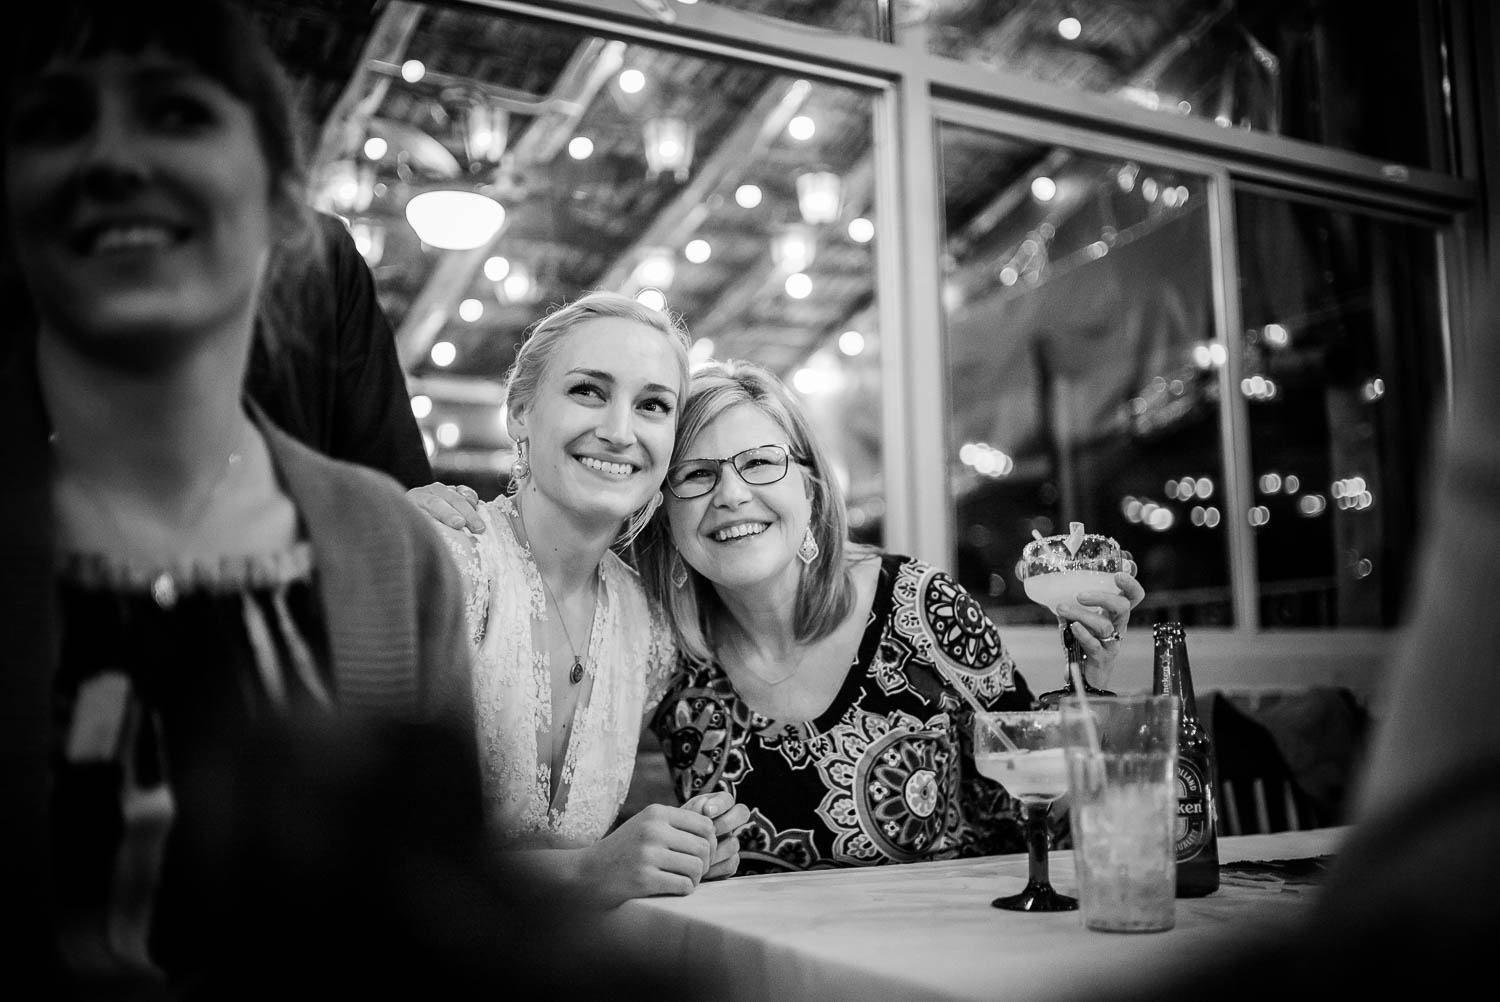 Mother and bride react to wedding rehearsal dinner in El Tiempo restaurant, Houston, Texas.